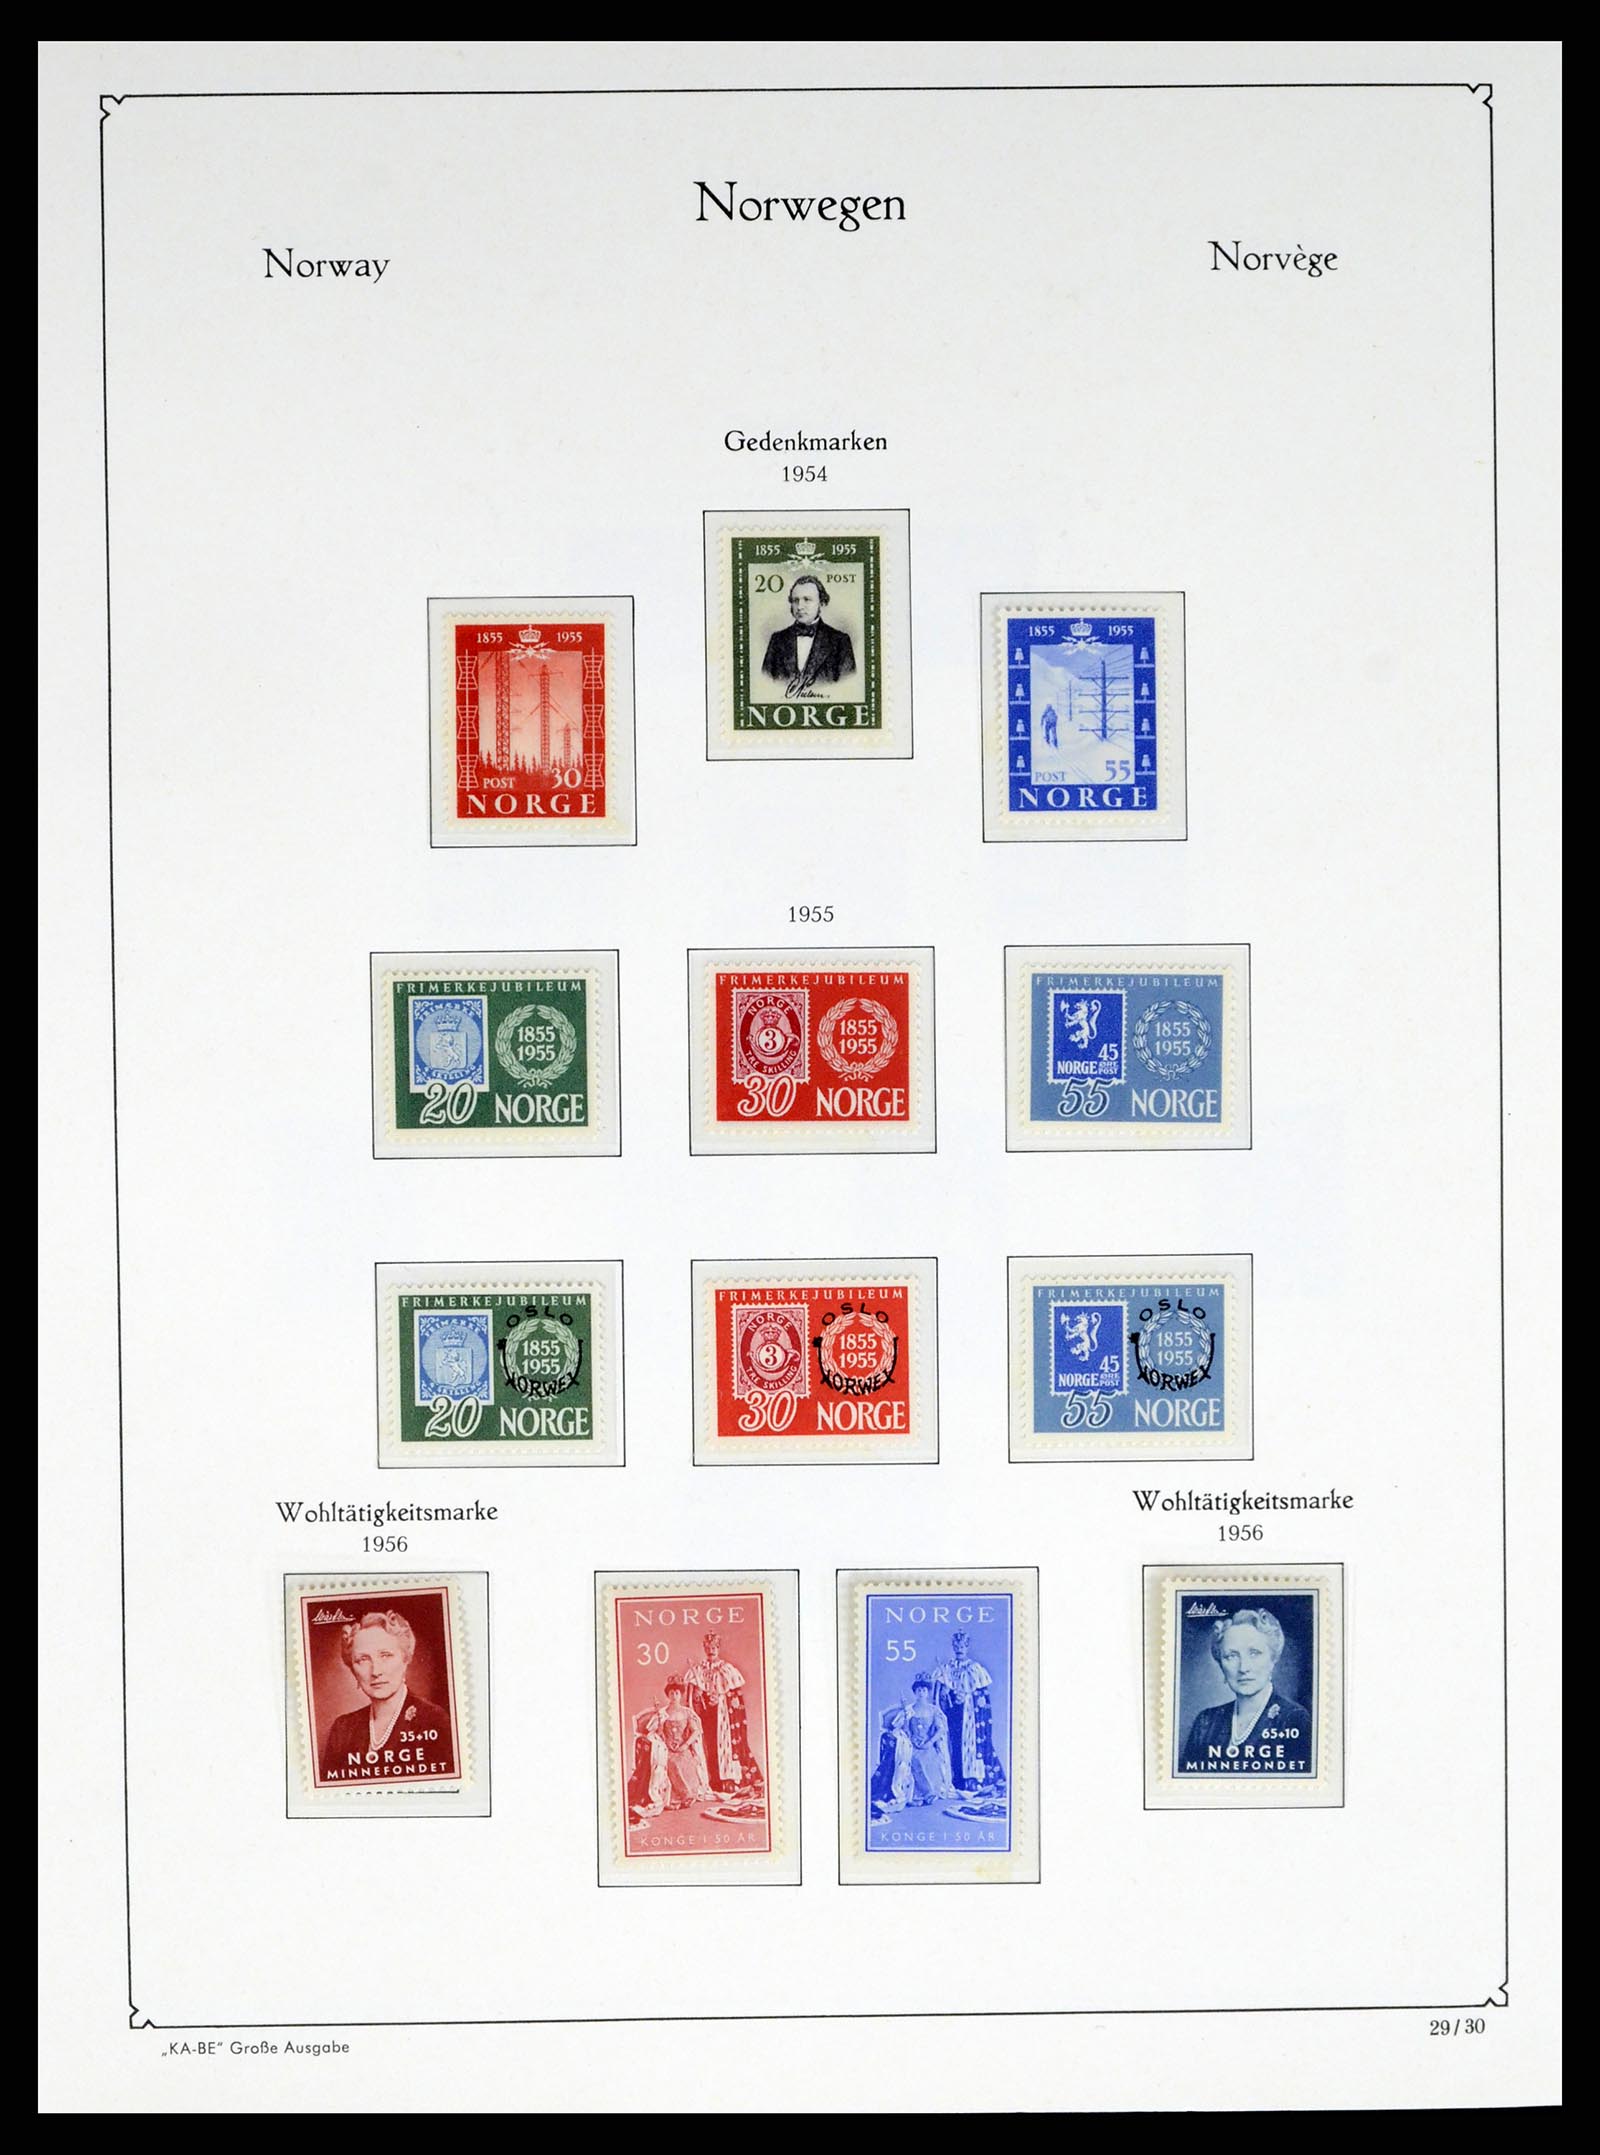 37788 032 - Stamp Collection 37788 Norway 1855-2006.